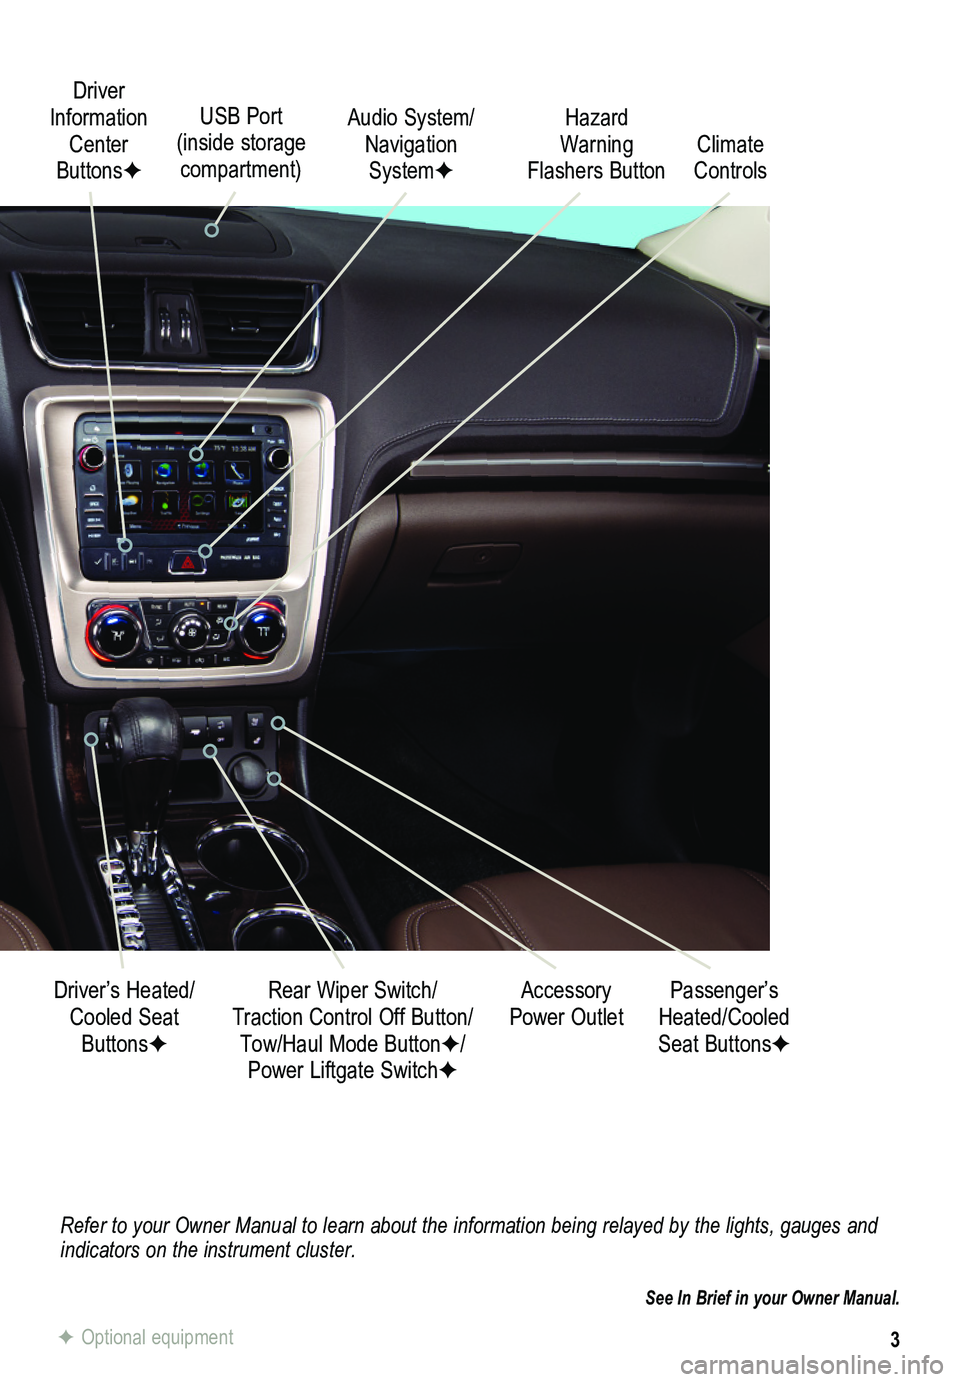 GMC ACADIA 2013  Get To Know Guide 3
Refer to your Owner Manual to learn about the information being relayed \
by the lights, gauges and indicators on the instrument cluster.
See In Brief in your Owner Manual.
Driver Information Center